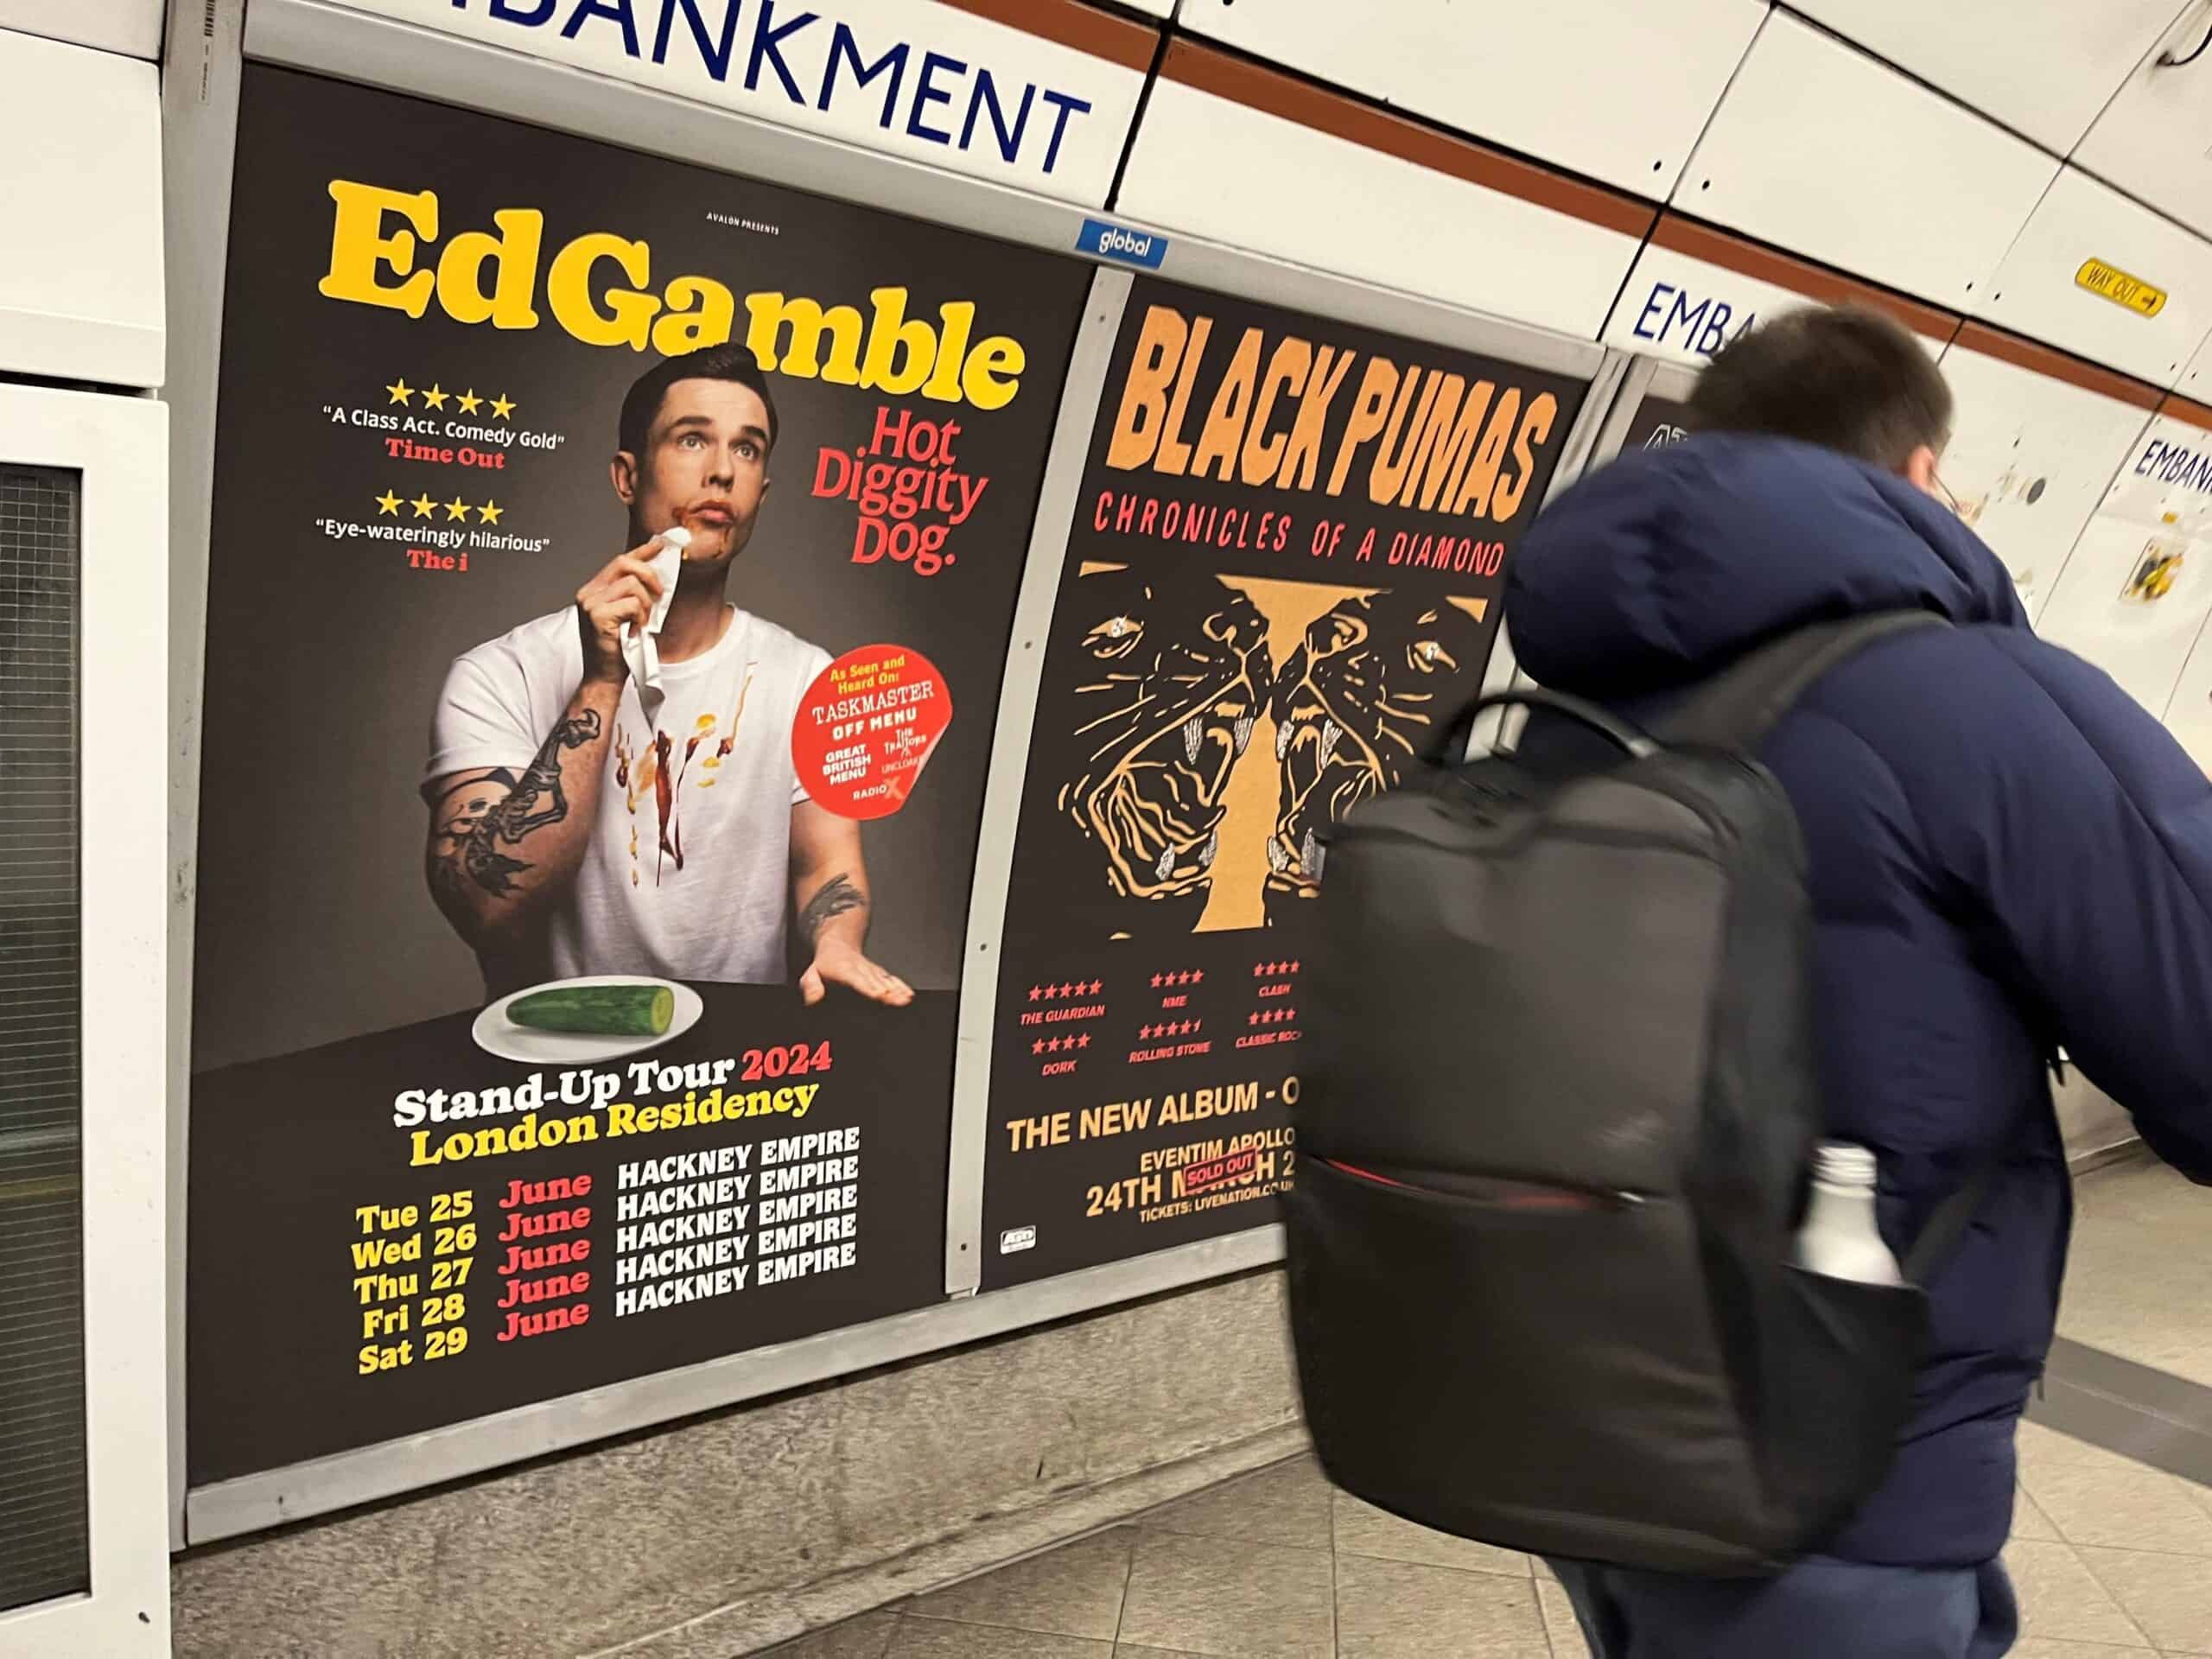 Ed Gamble responds brilliantly after being told to remove hot dog ad from London Underground